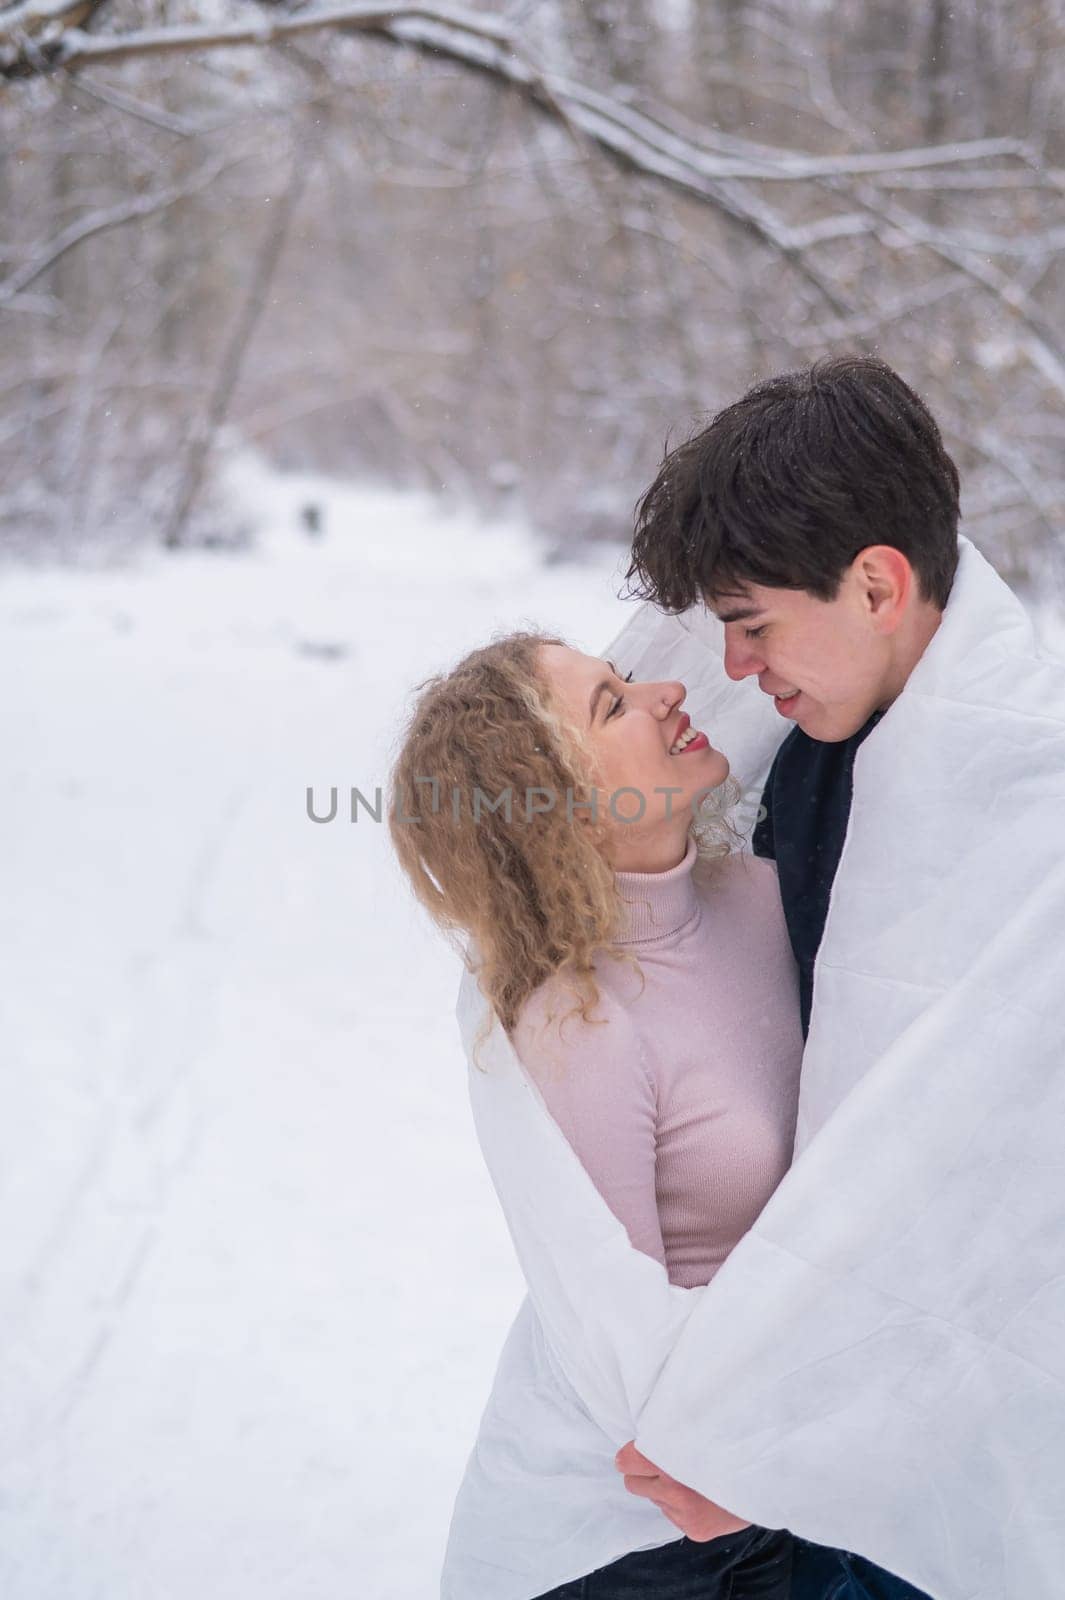 A young couple walks in the park in winter. The guy and the girl are kissing wrapped in a white blanket outdoors. by mrwed54